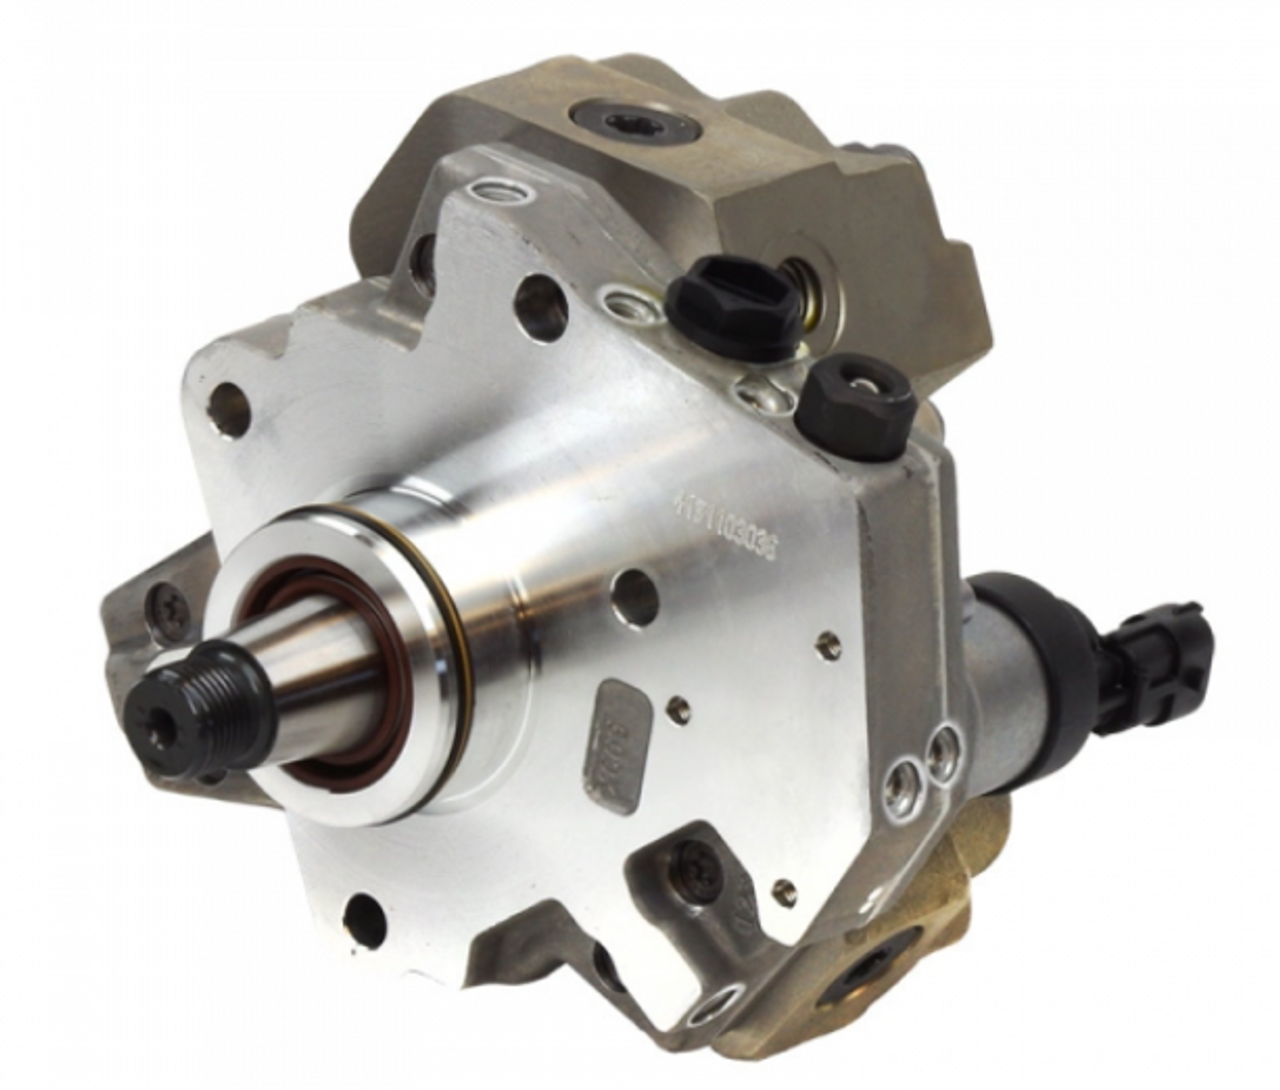 Industrial Injection New CP3 Fuel Pump 2006 to 2010 6.6L LBZ/LMM Duramax (II0 445 020 105-IIS)-Main View